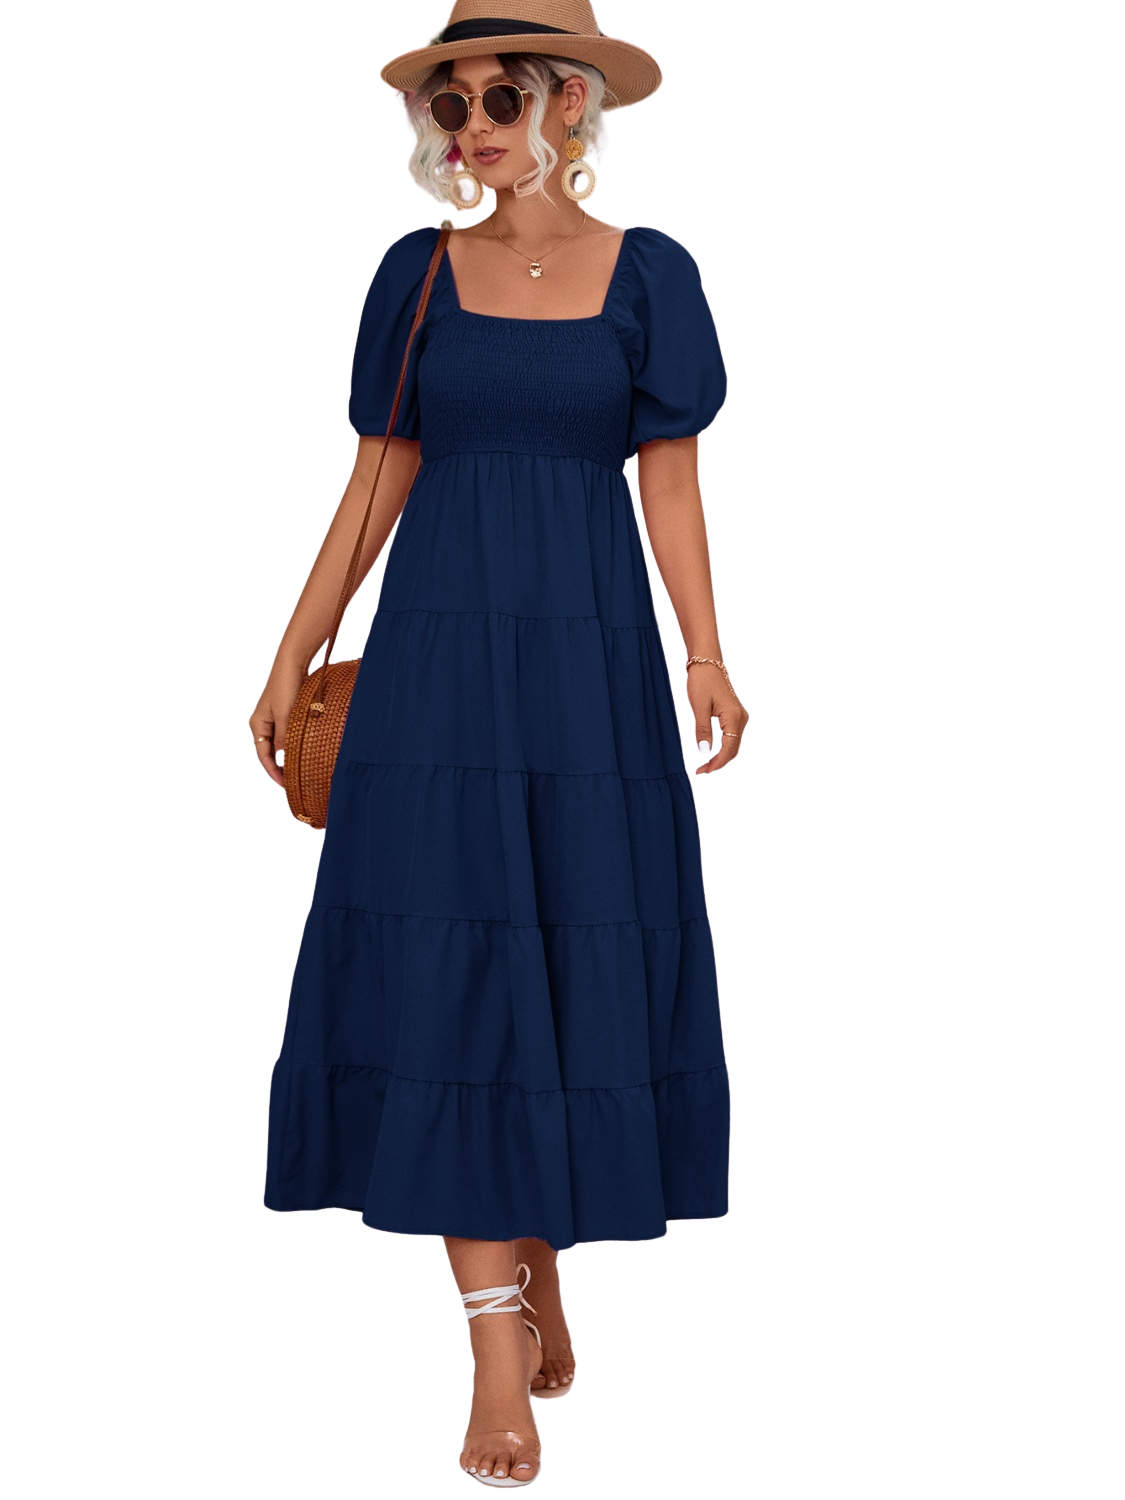 Chic Tiered Smocked Dress in navy, black, & hot pink. Perfect blend of elegance & comfort for any occasion. Shop now for timeless style!